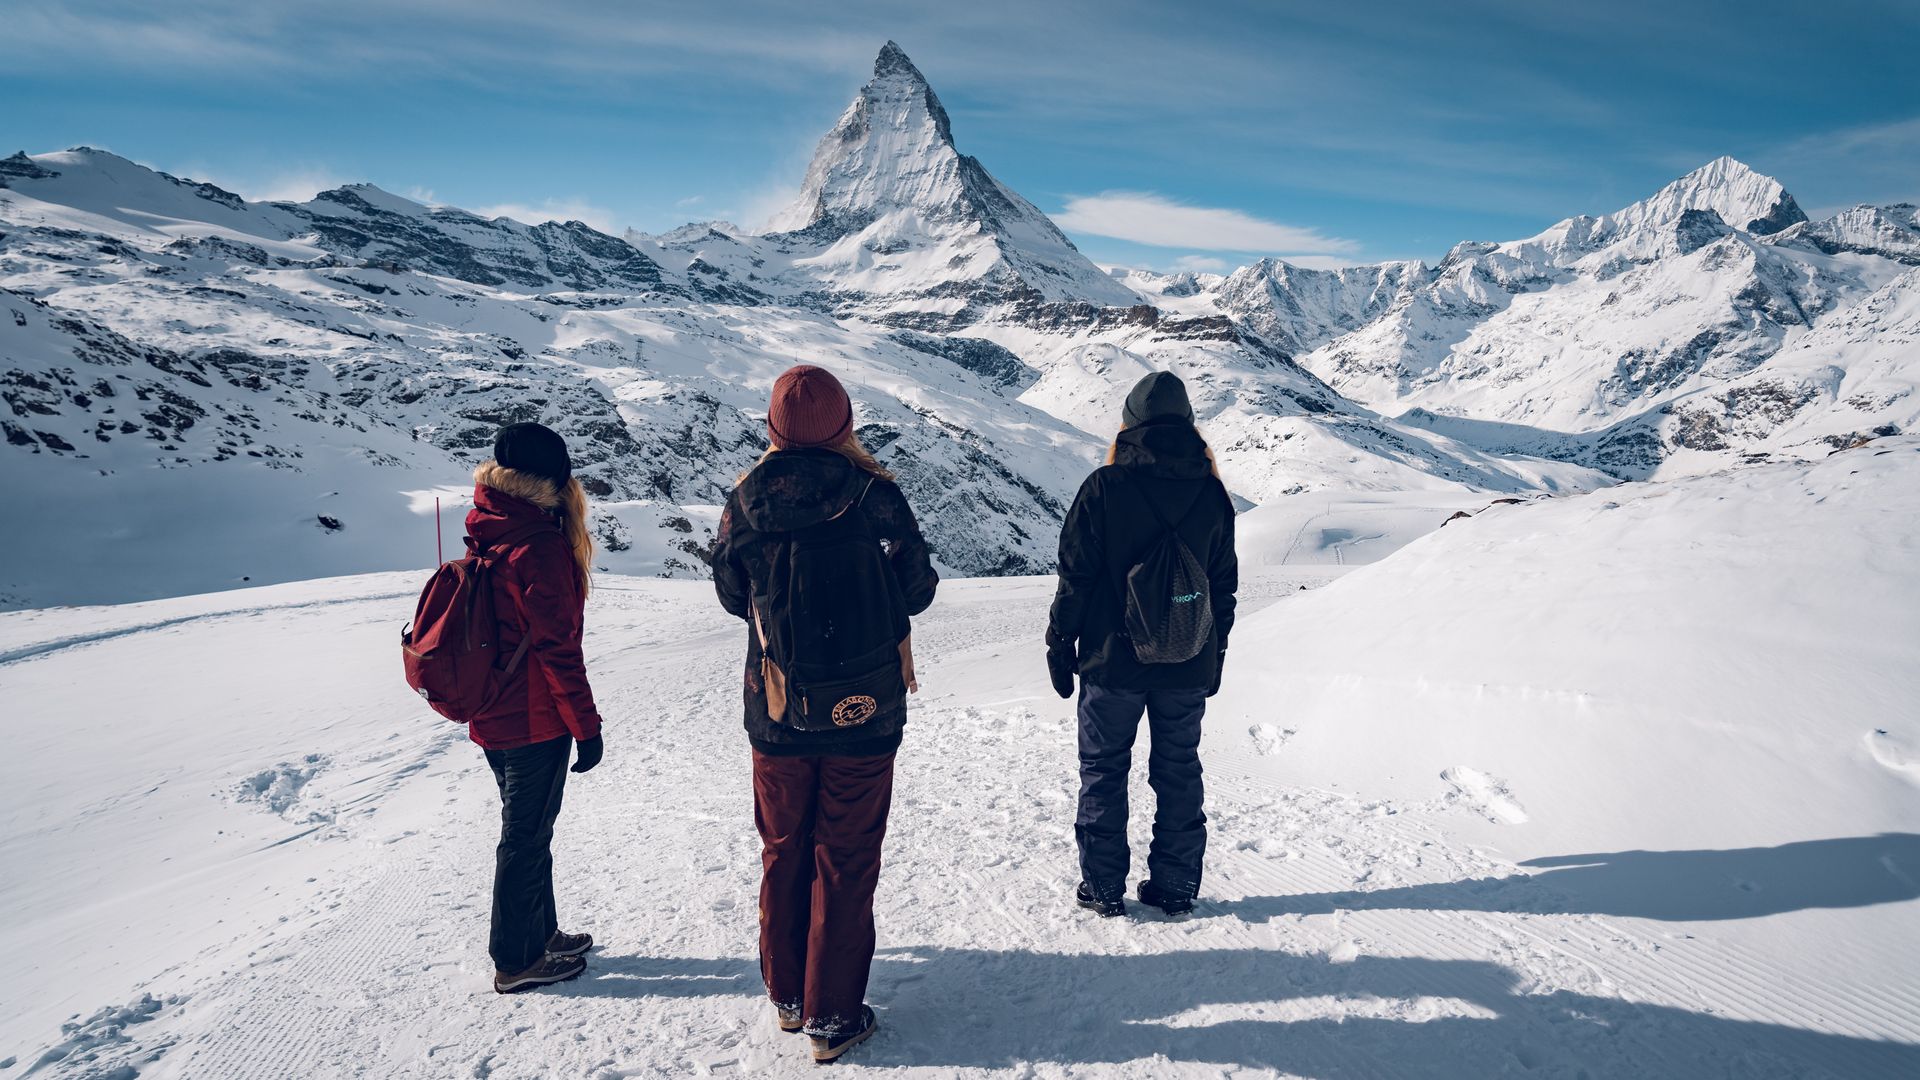 Winter hiking on the Gornergrat with a view of the Matterhorn